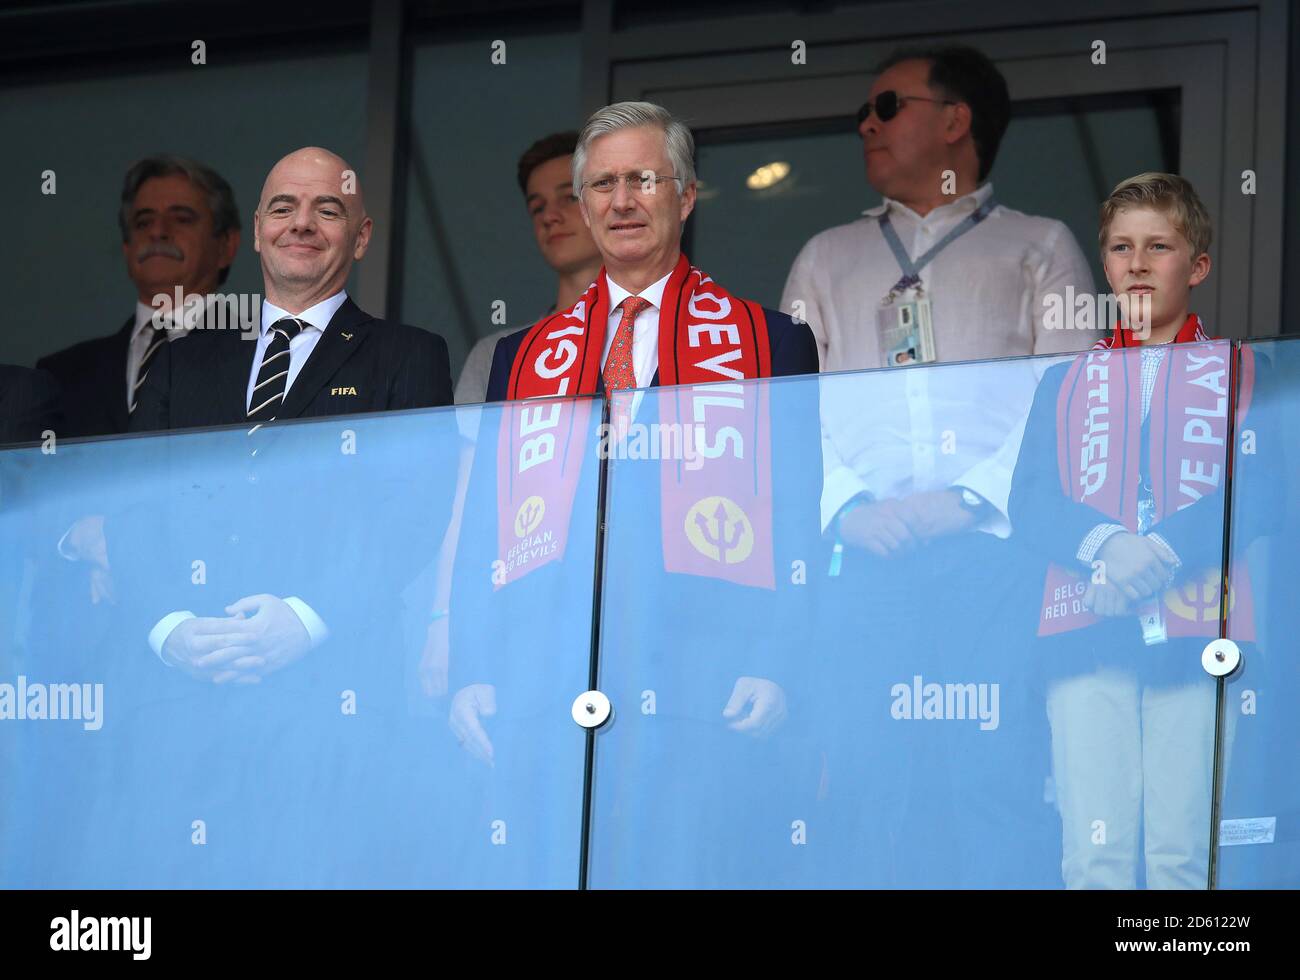 FIFA President Gianni Infantino (left) and King Philippe of Belgium with son Prince Emmanuel of Belgium in the stands Stock Photo